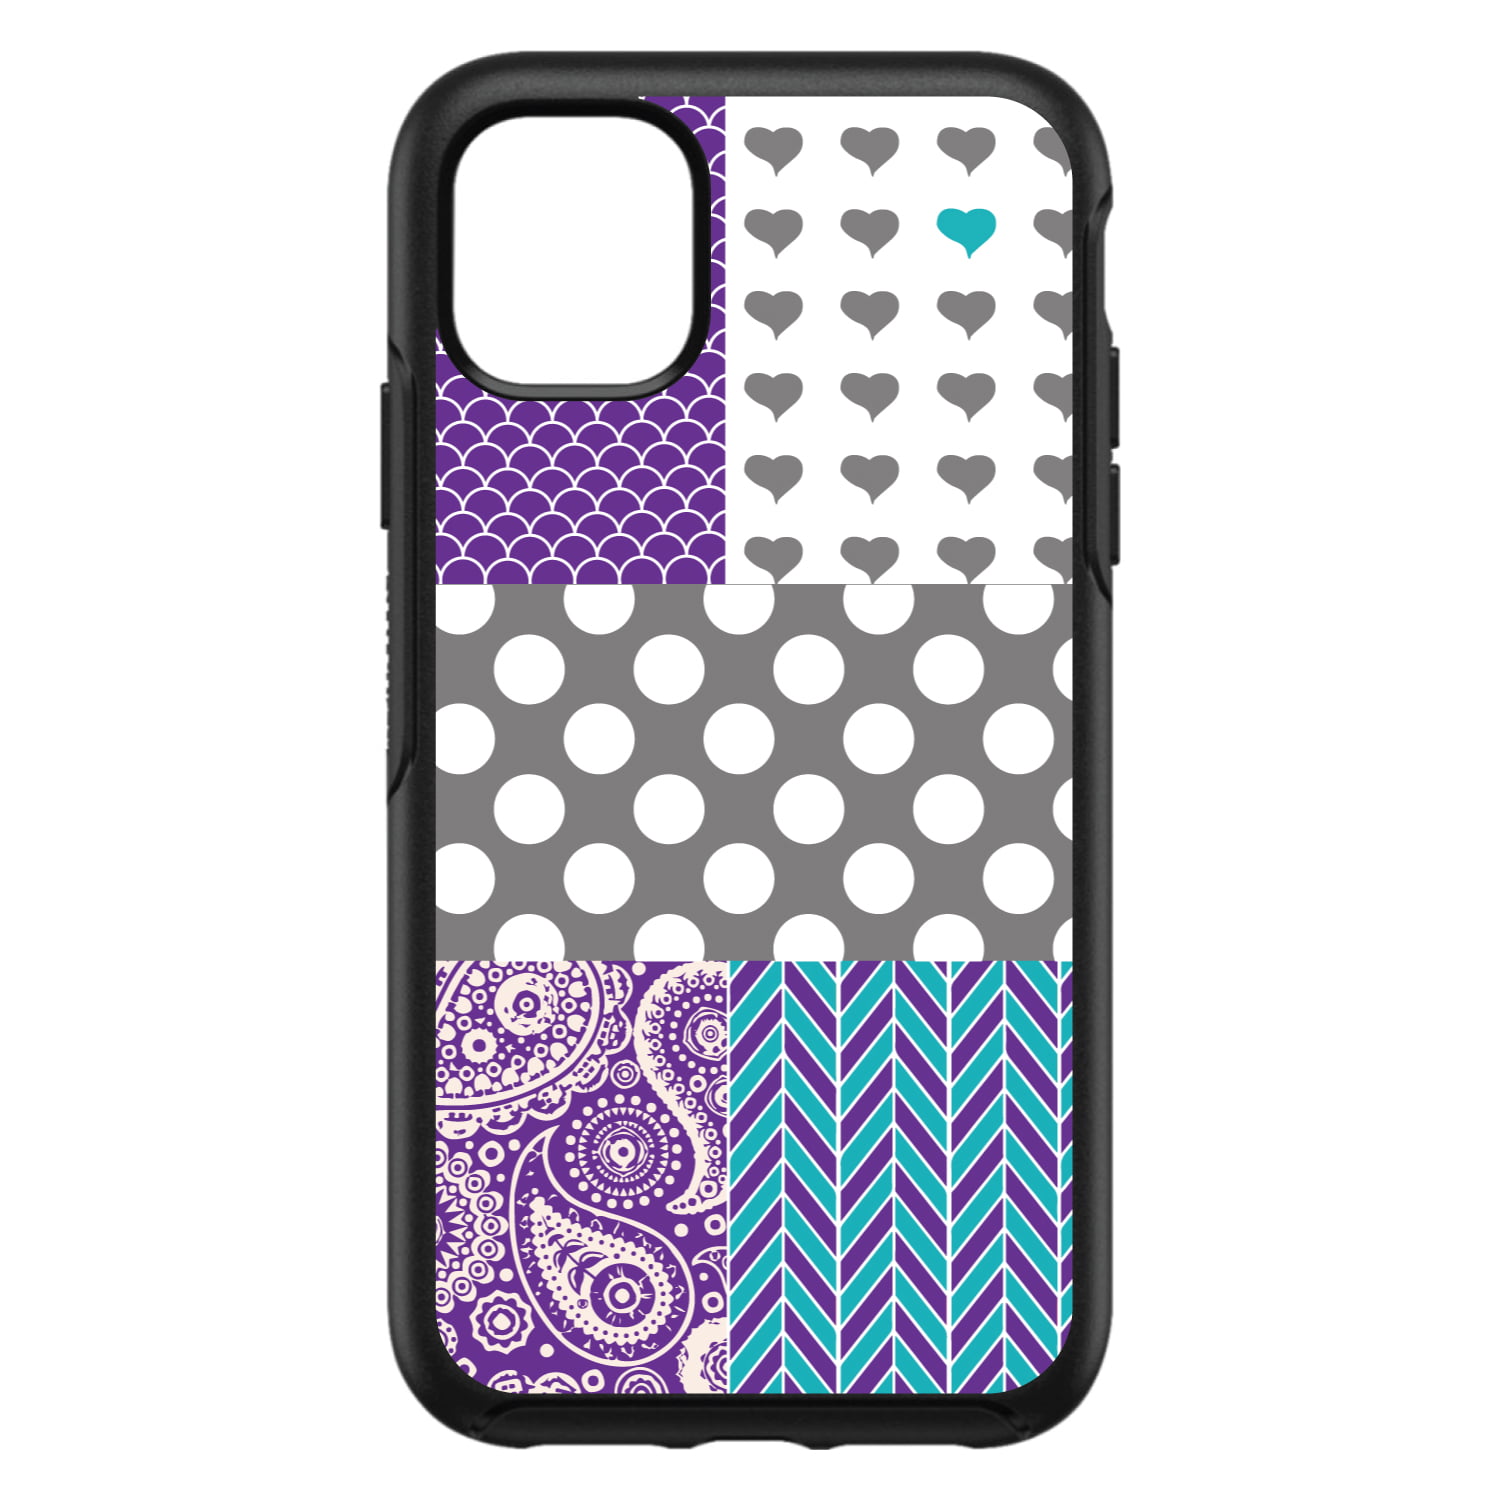 DistinctInk Custom SKIN / DECAL compatible with OtterBox Symmetry for iPhone 11 Pro (5.8" Screen) - Purple Teal Grey Patterns